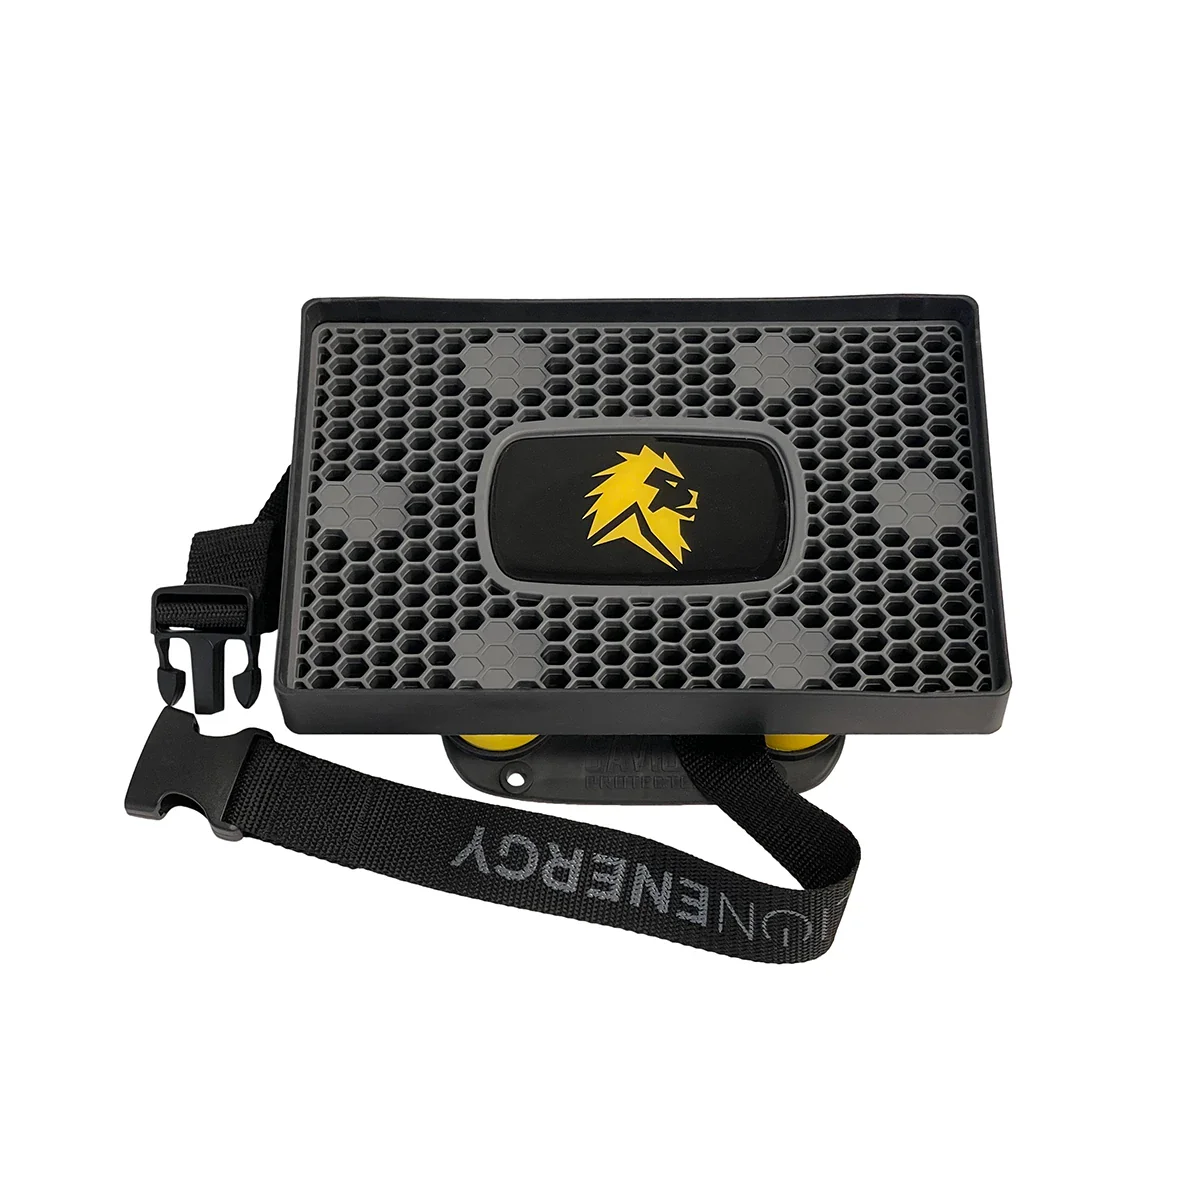 Lion Energy ShockProof Battery Tray